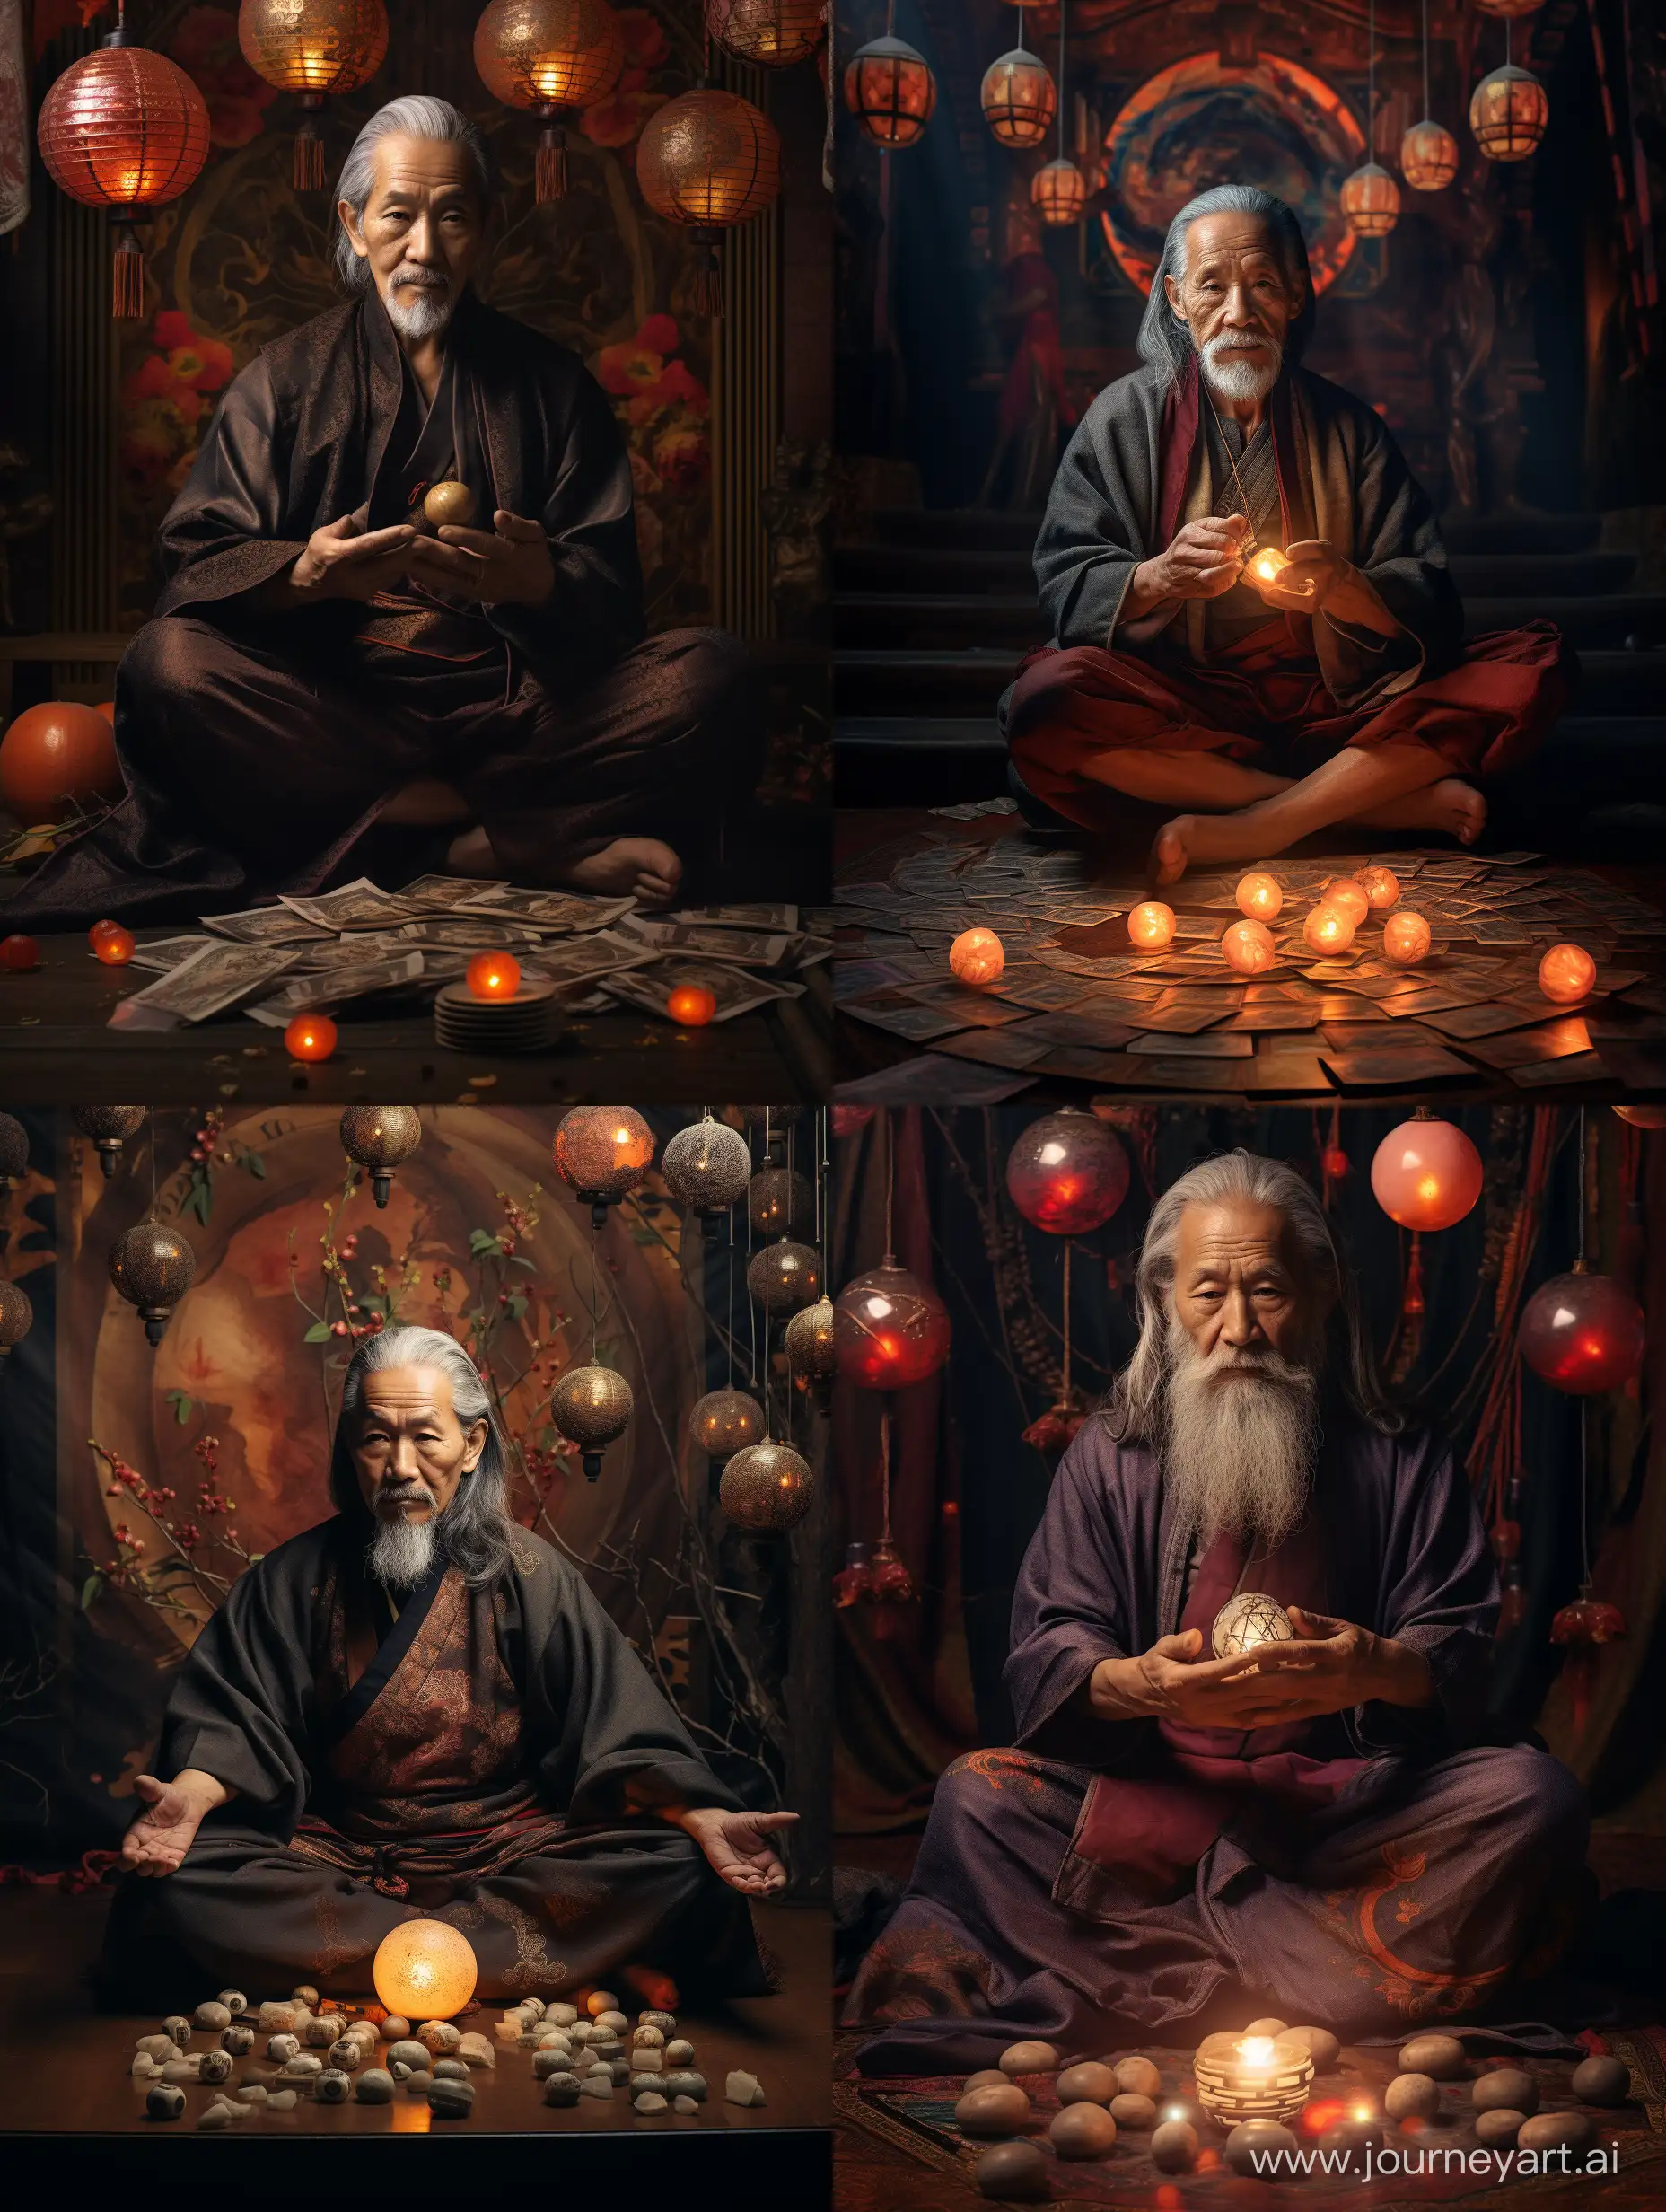 Chinese sage, 79 years old, sitting in the lotus position, holding a magic ball in his hand, tarot cards scattered on the floor, looking at the ball, 4k, high detail, warm lighting, dark colors, Medium Shot